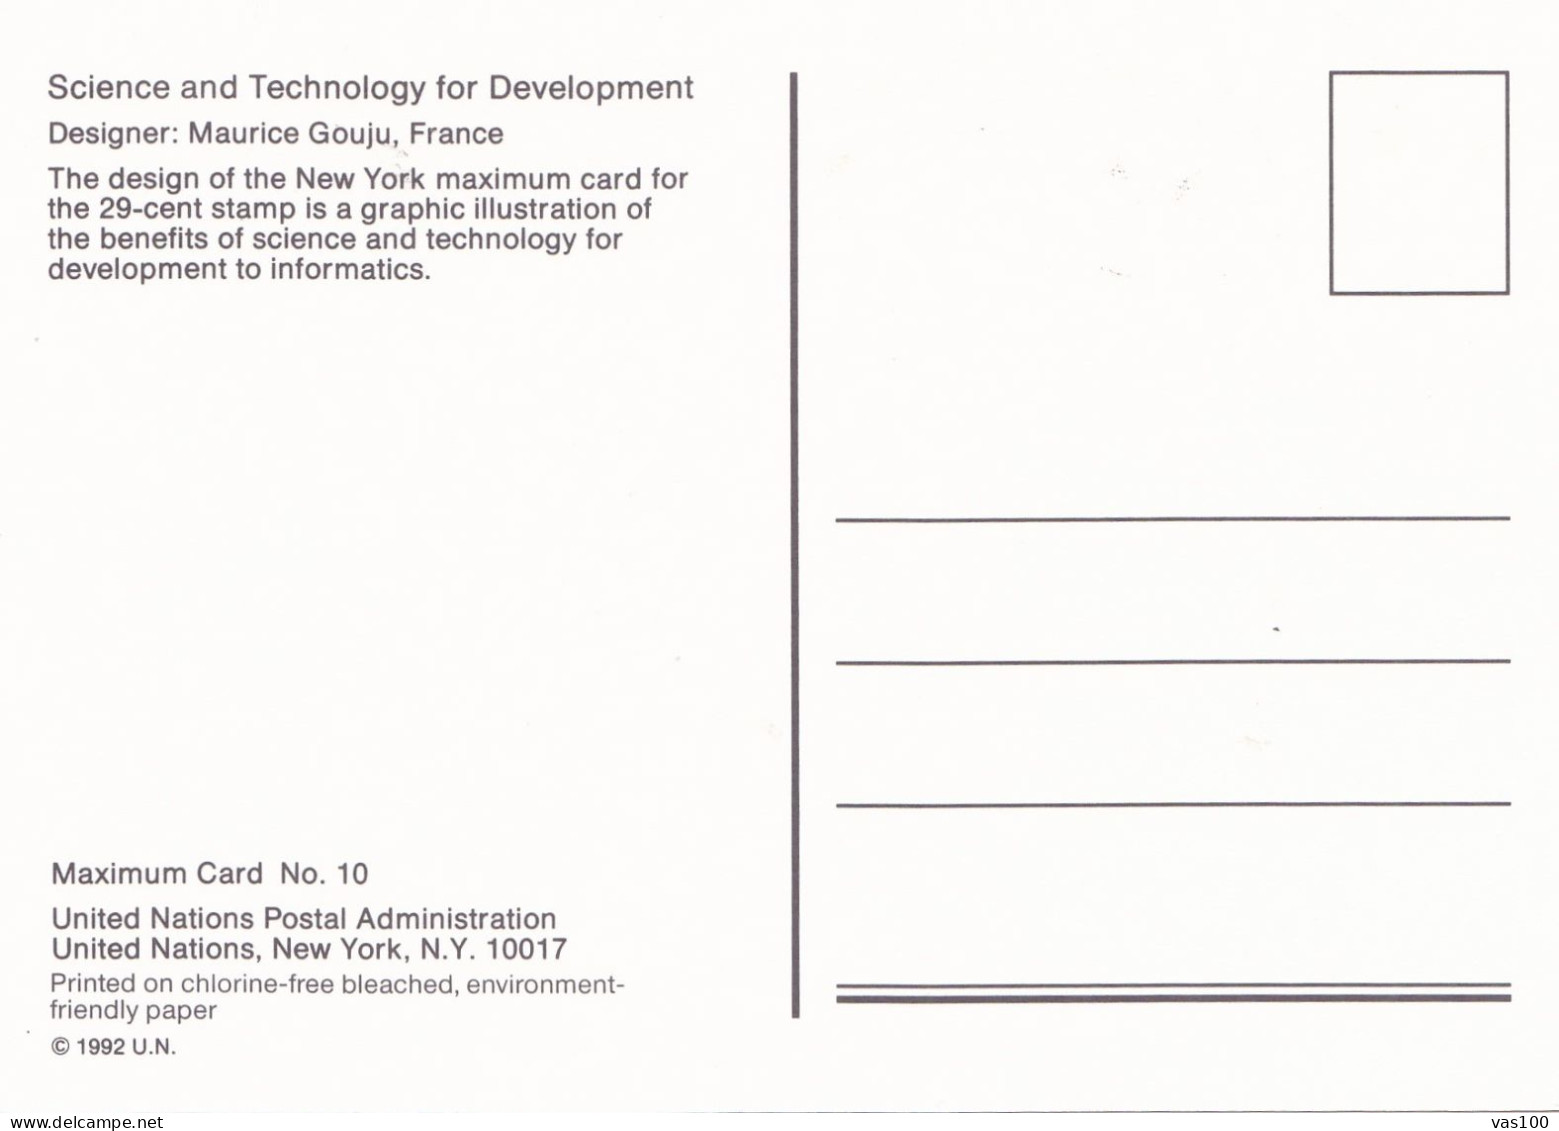 SCIENCE AND TECHNOLOGY FOR DEVELOPMENT  MAXIMUM CARD UNITED NATIONS NEW YORK 1992 U.N. - Informatique